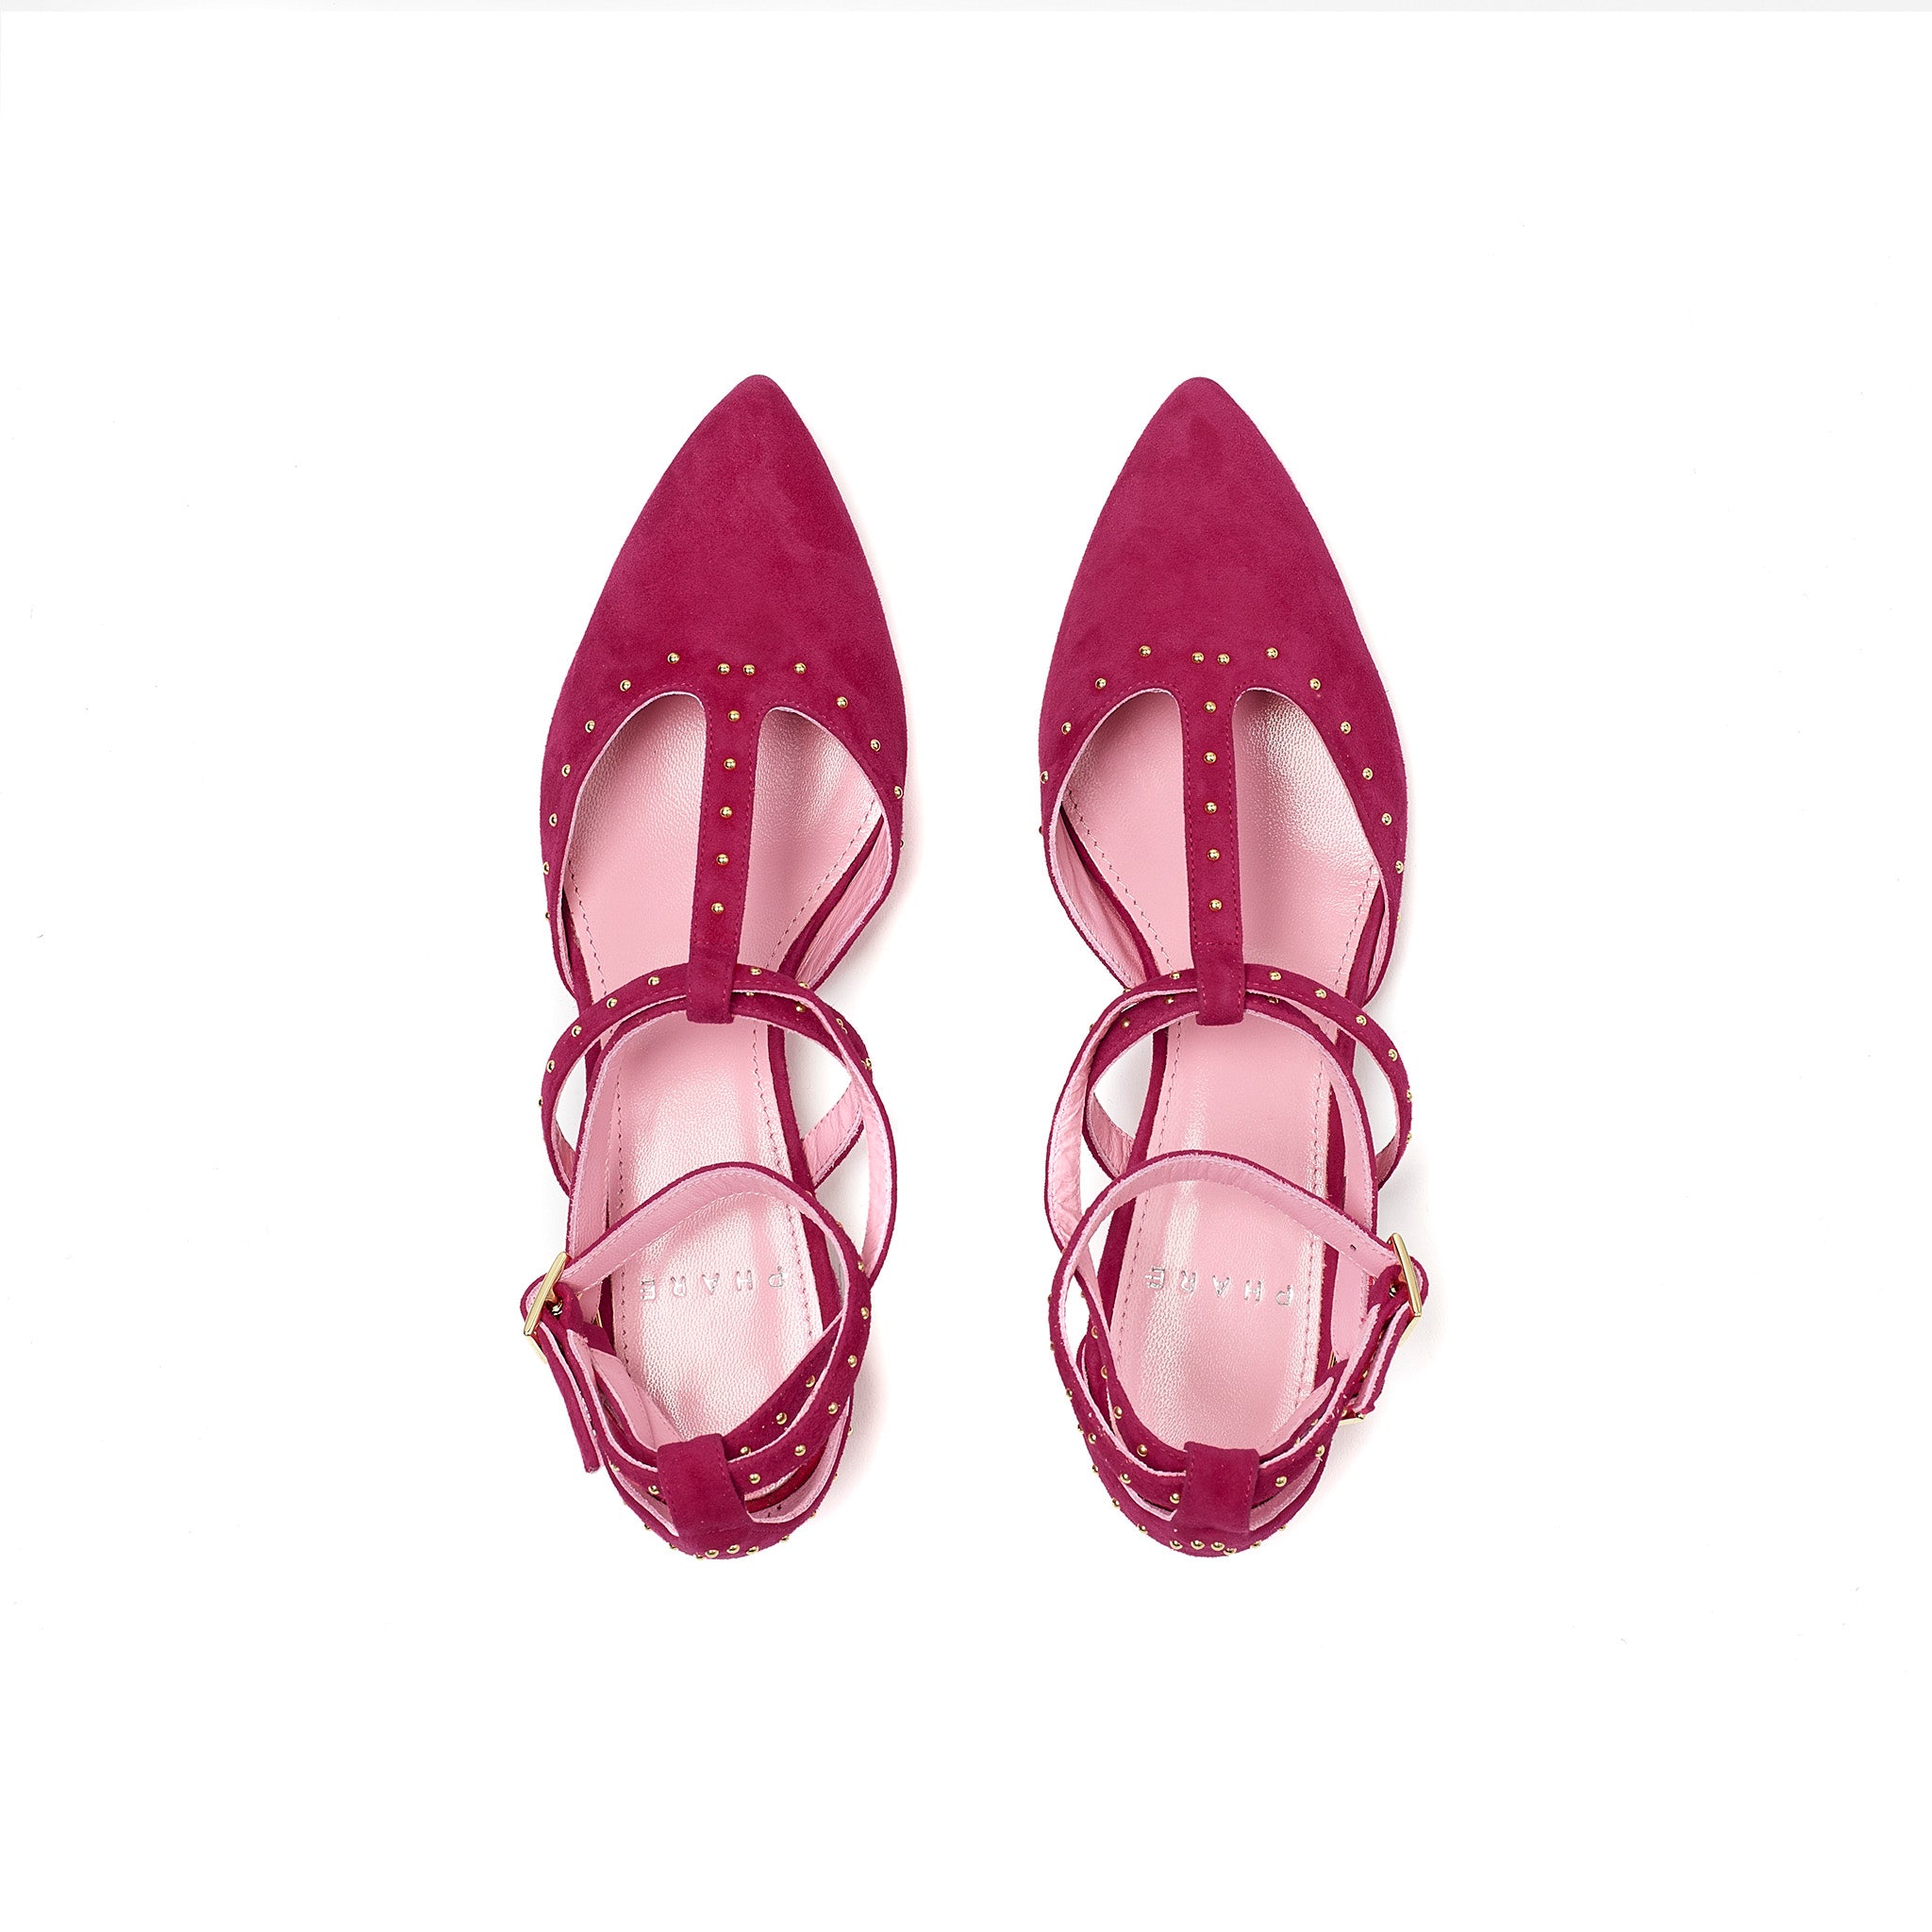 Phare Studded pointed flat in azalea suede with gold studs top view 